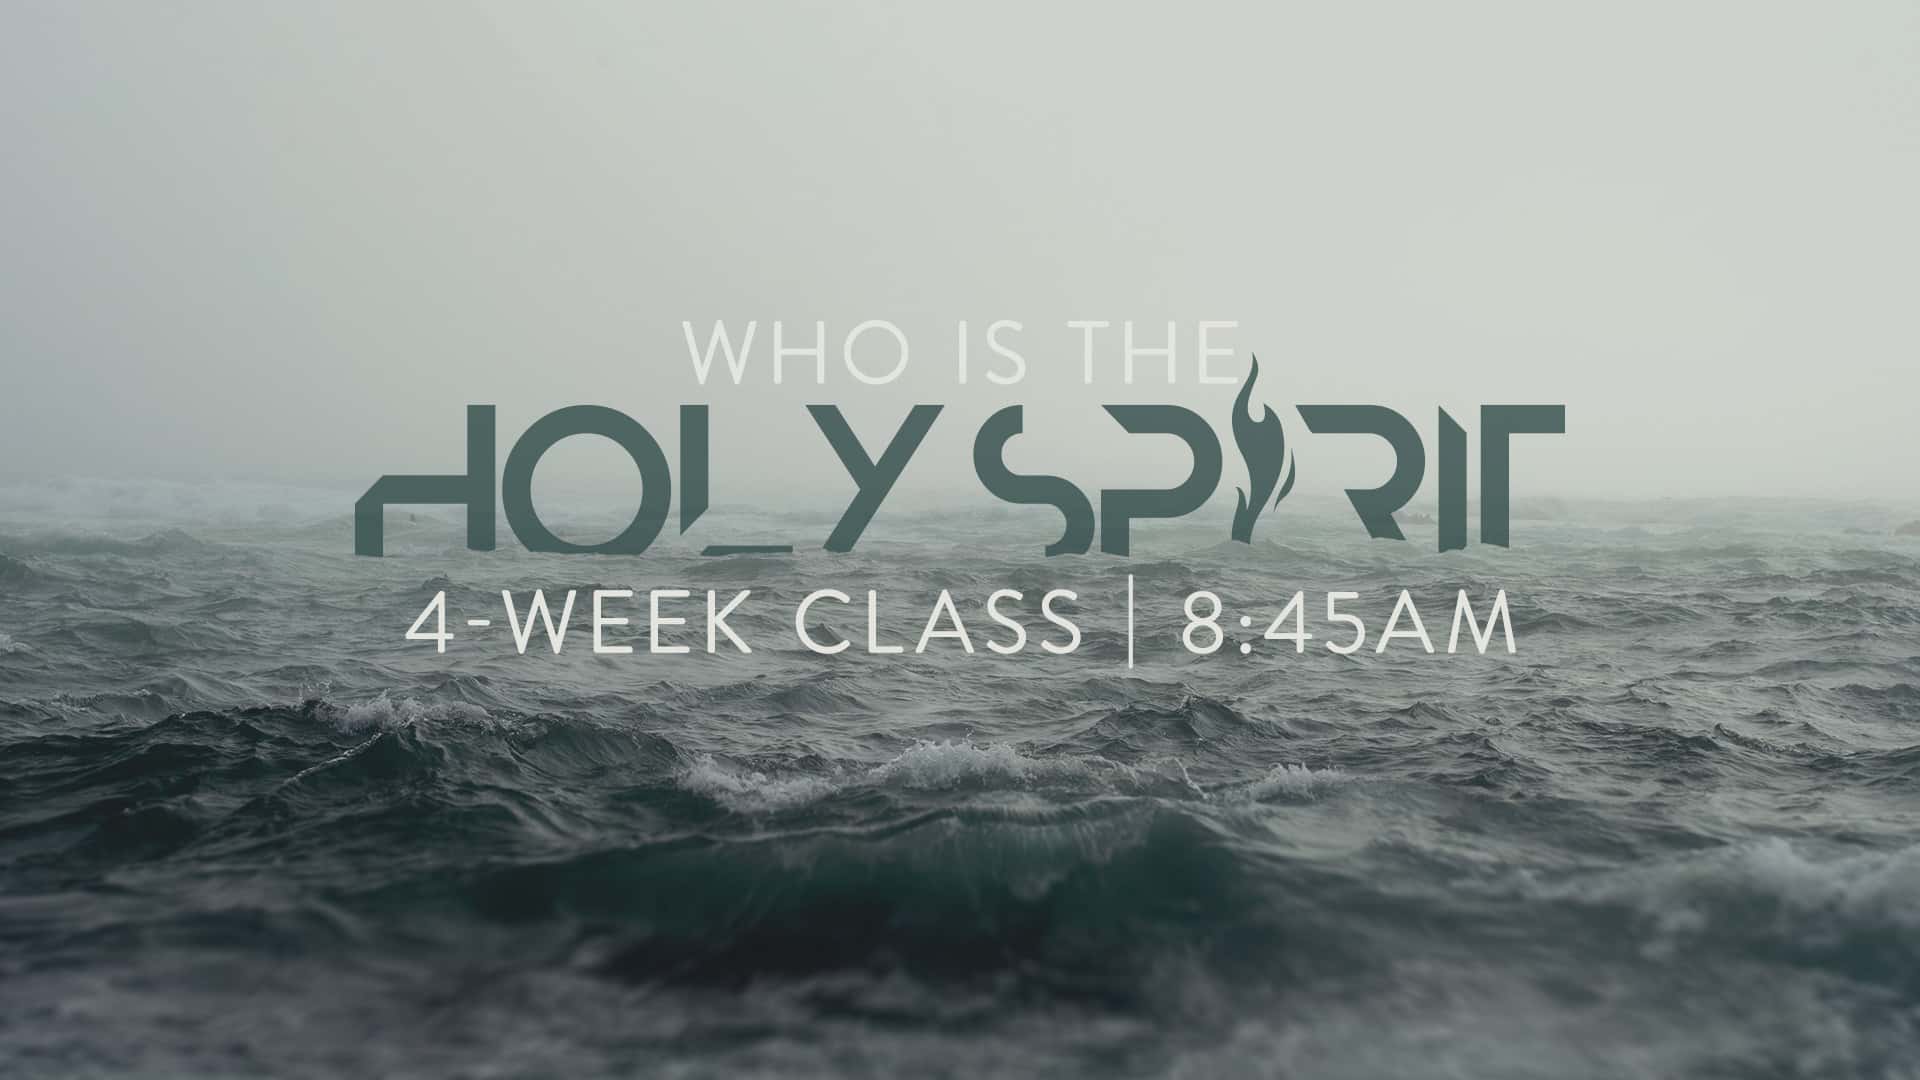 WHO IS THE HOLY SPIRIT?